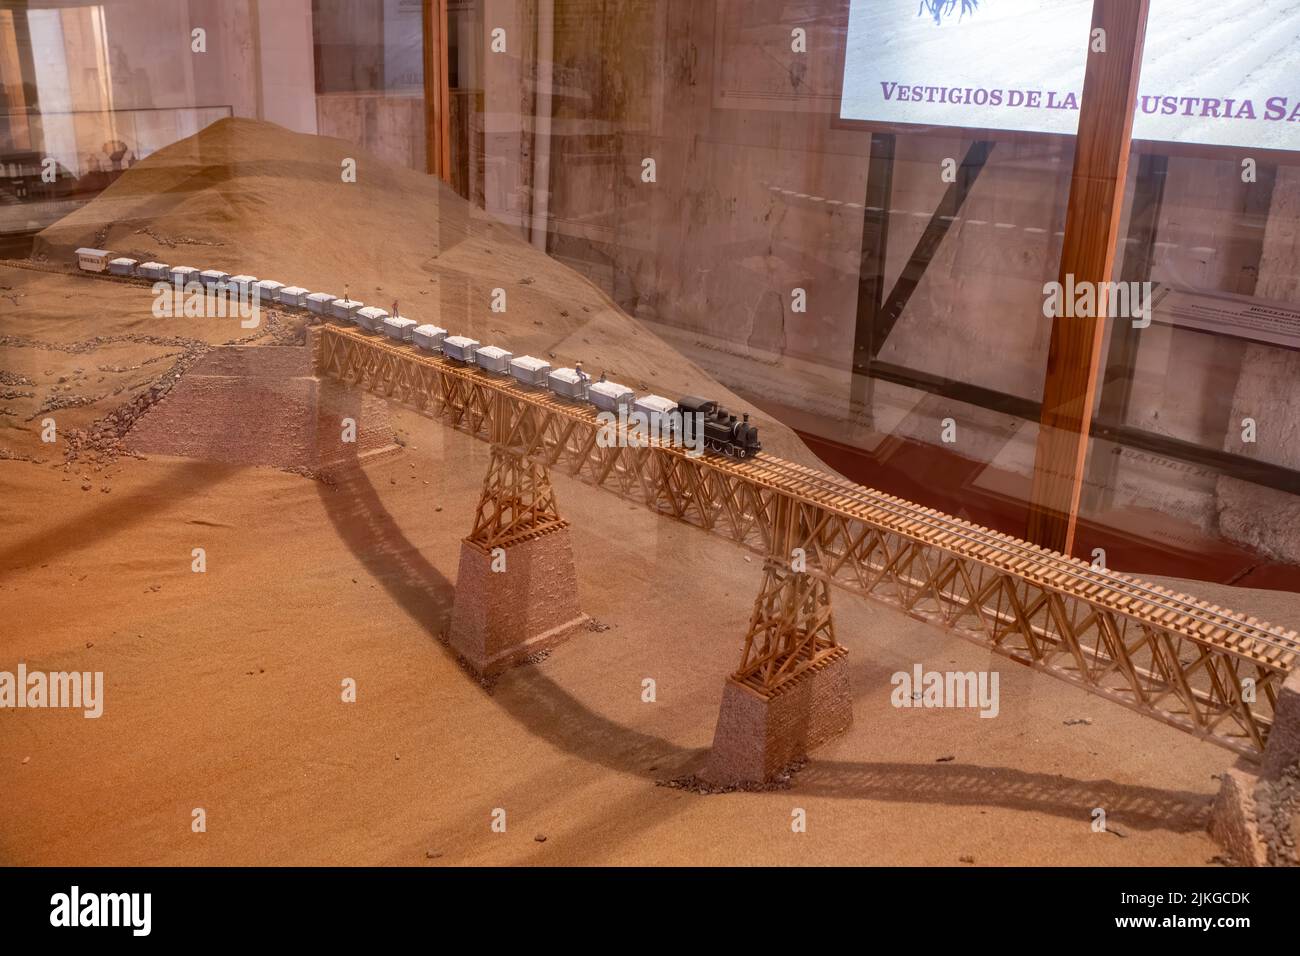 A model of the railroad for hauling processed saltpeter or nitrates to the port for shipping.  Humberstone museum.  Chile. Stock Photo